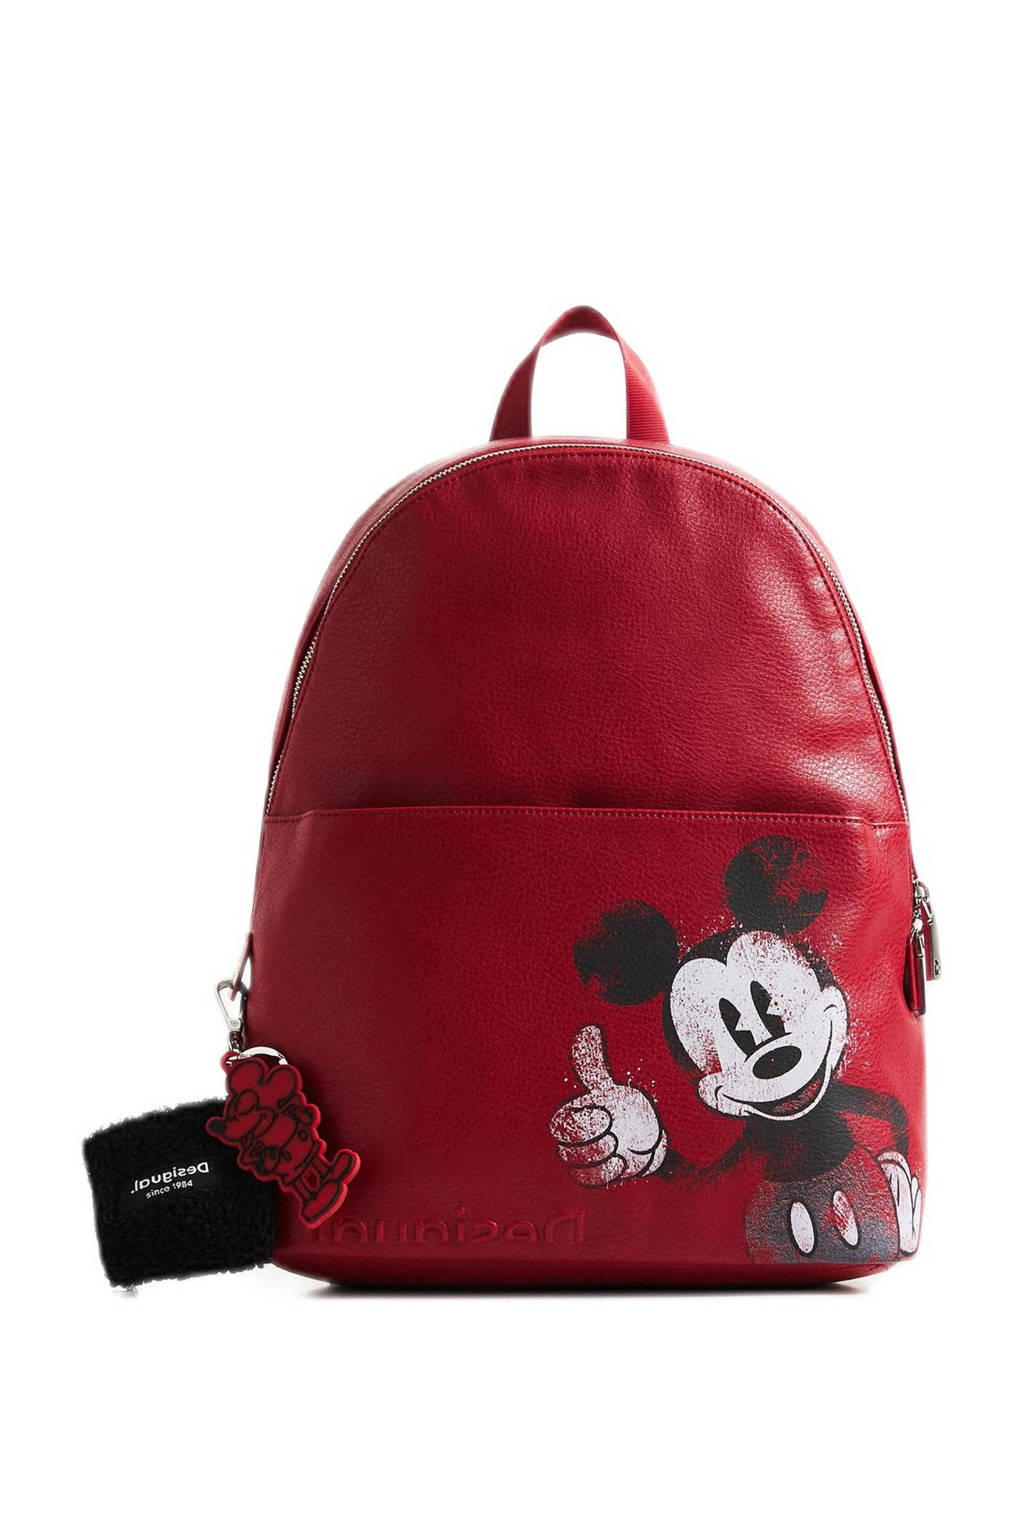 Desigual  rugzak Mickey Mouse rood, Rood